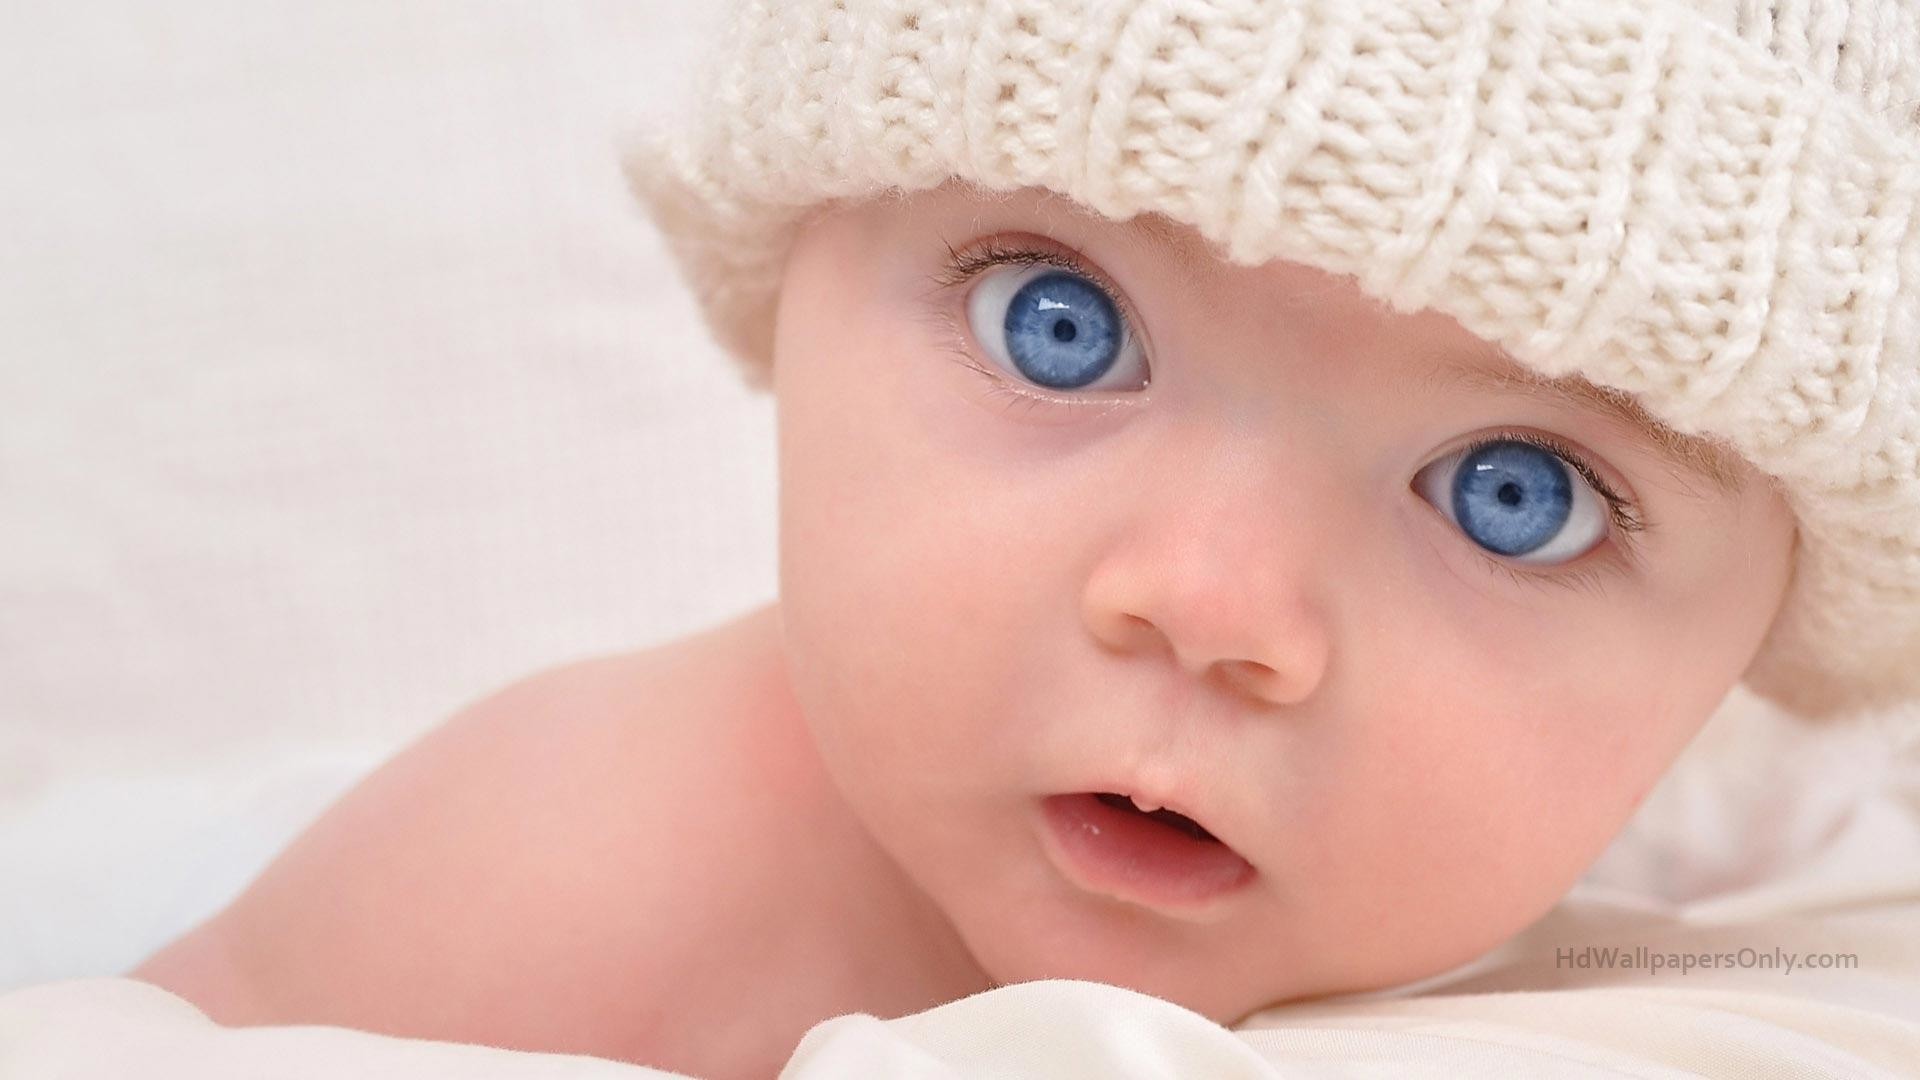 1920x1080 cute baby wallpapers - BinFind Search Engine